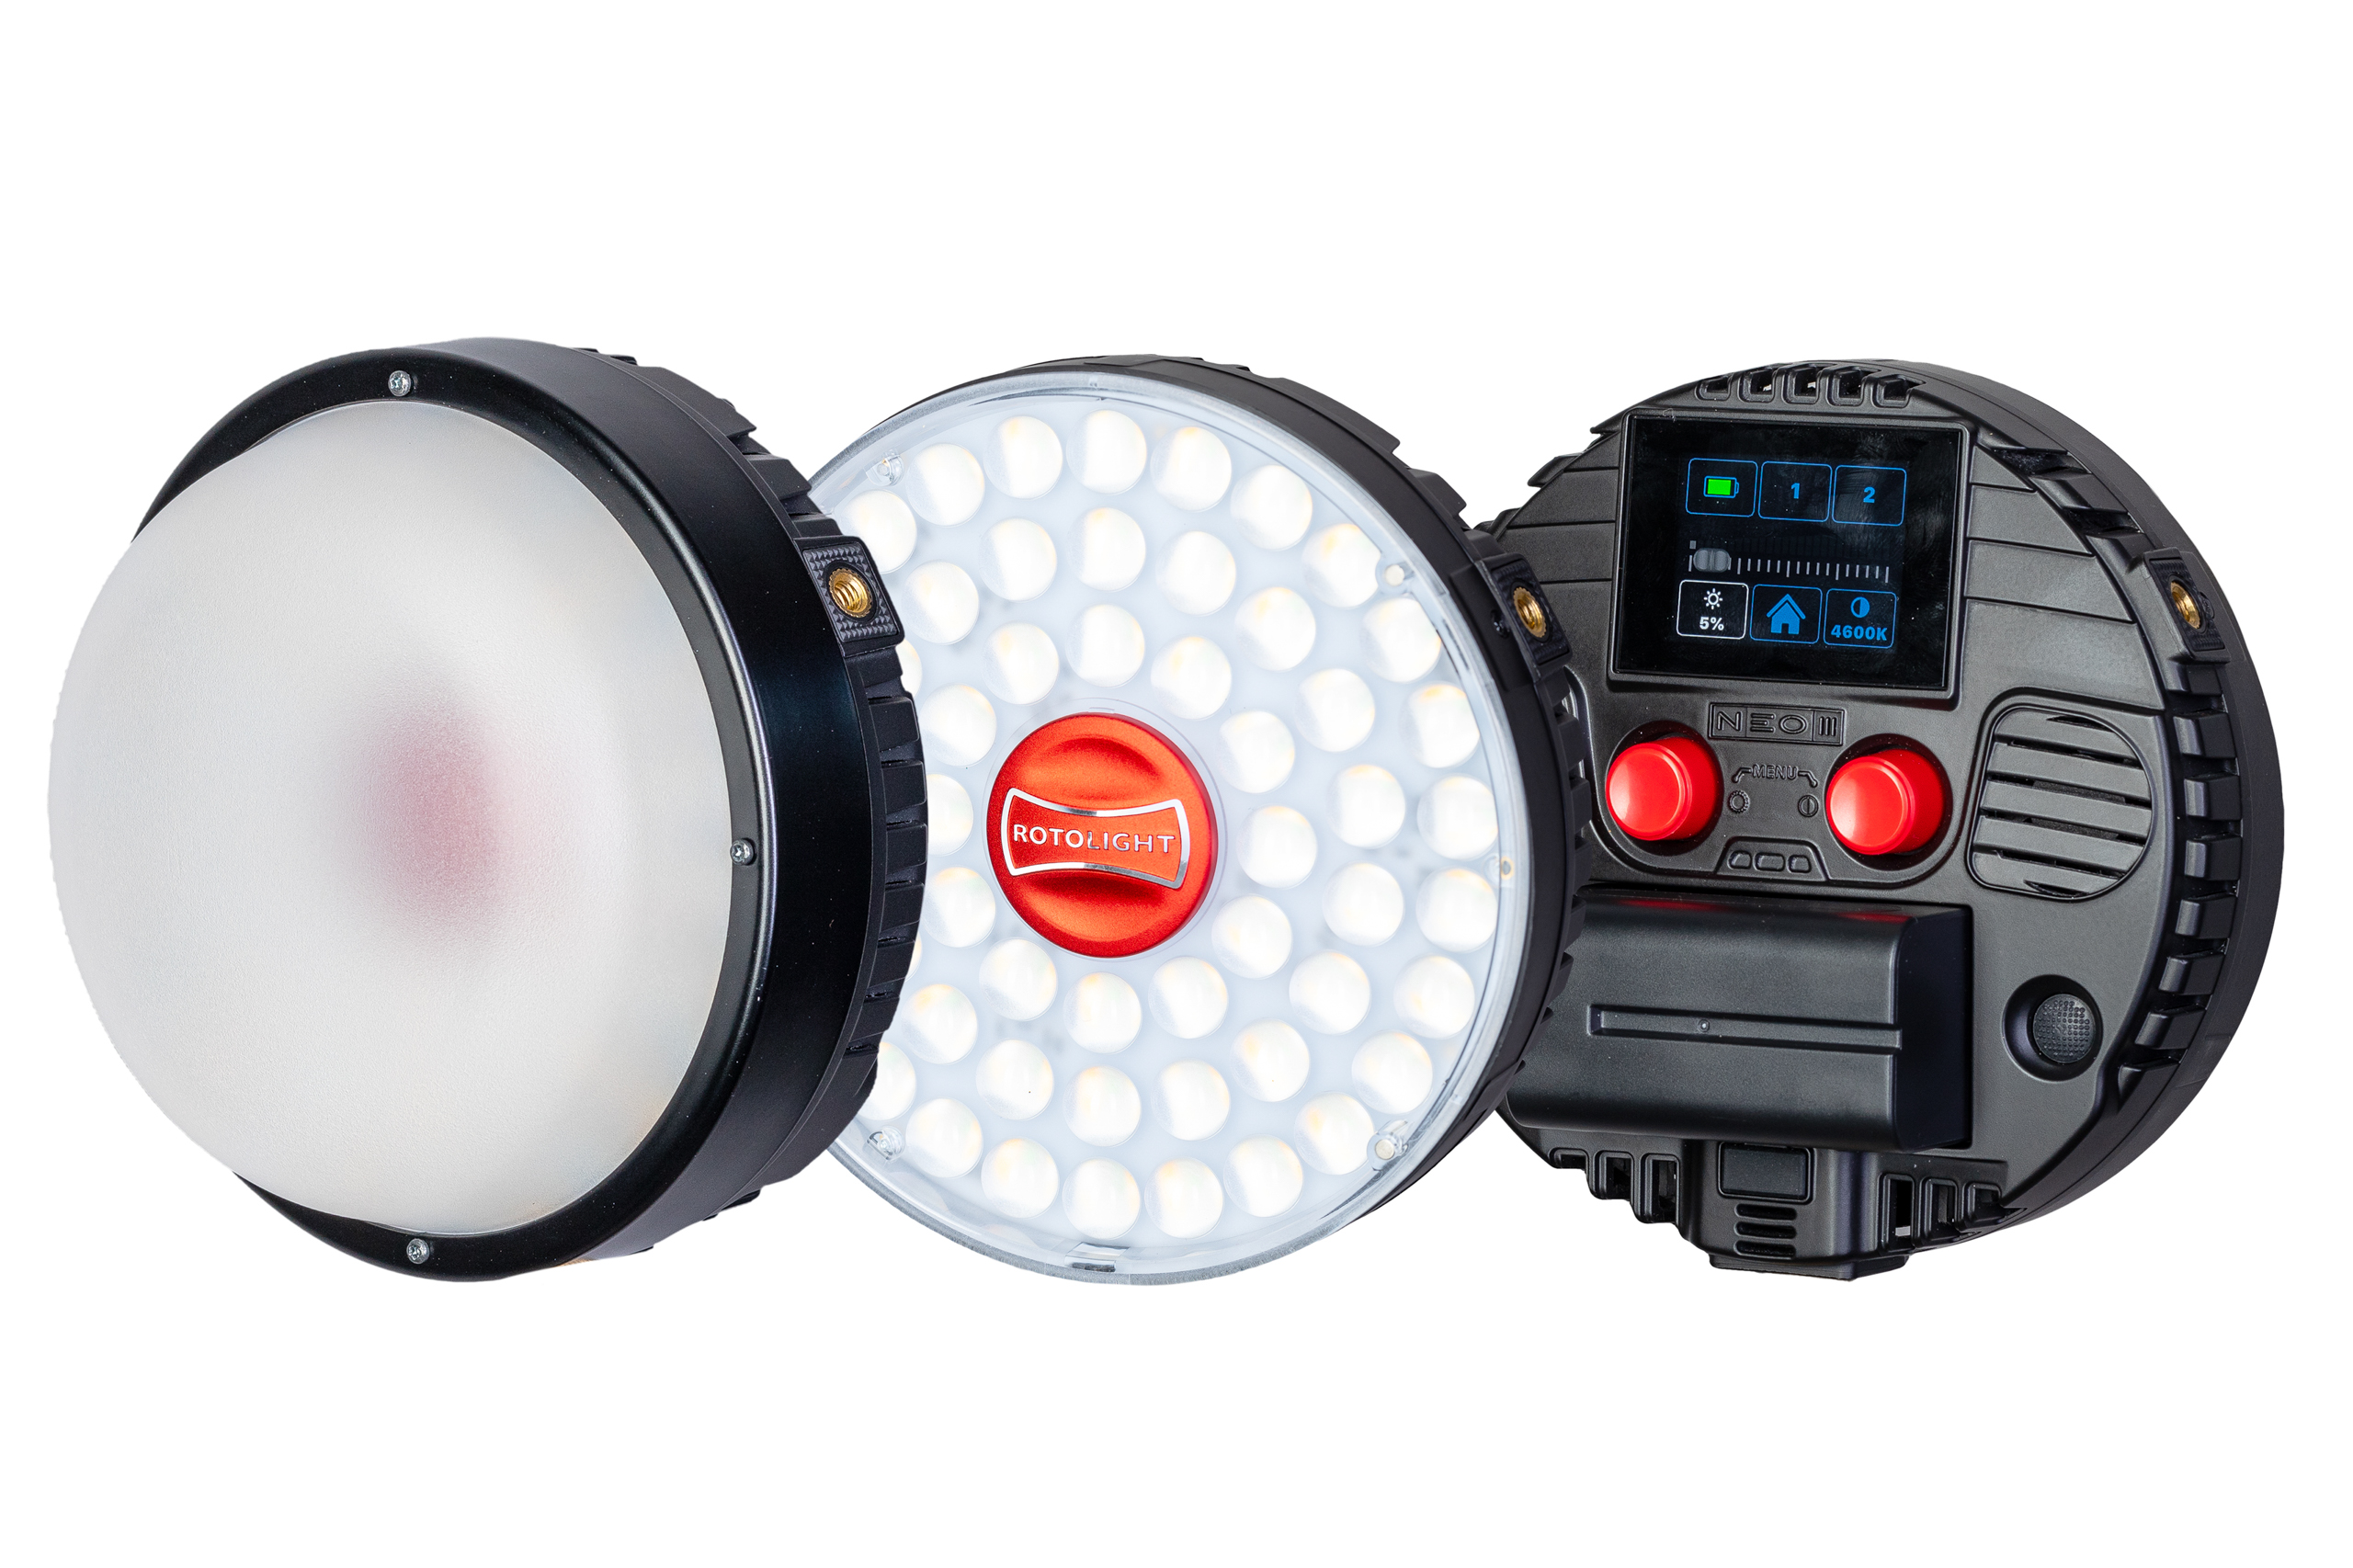 Rotolight Neo 3 with dome in place, showing LEDs and rear panel with touchscreen and NP series battery in place.